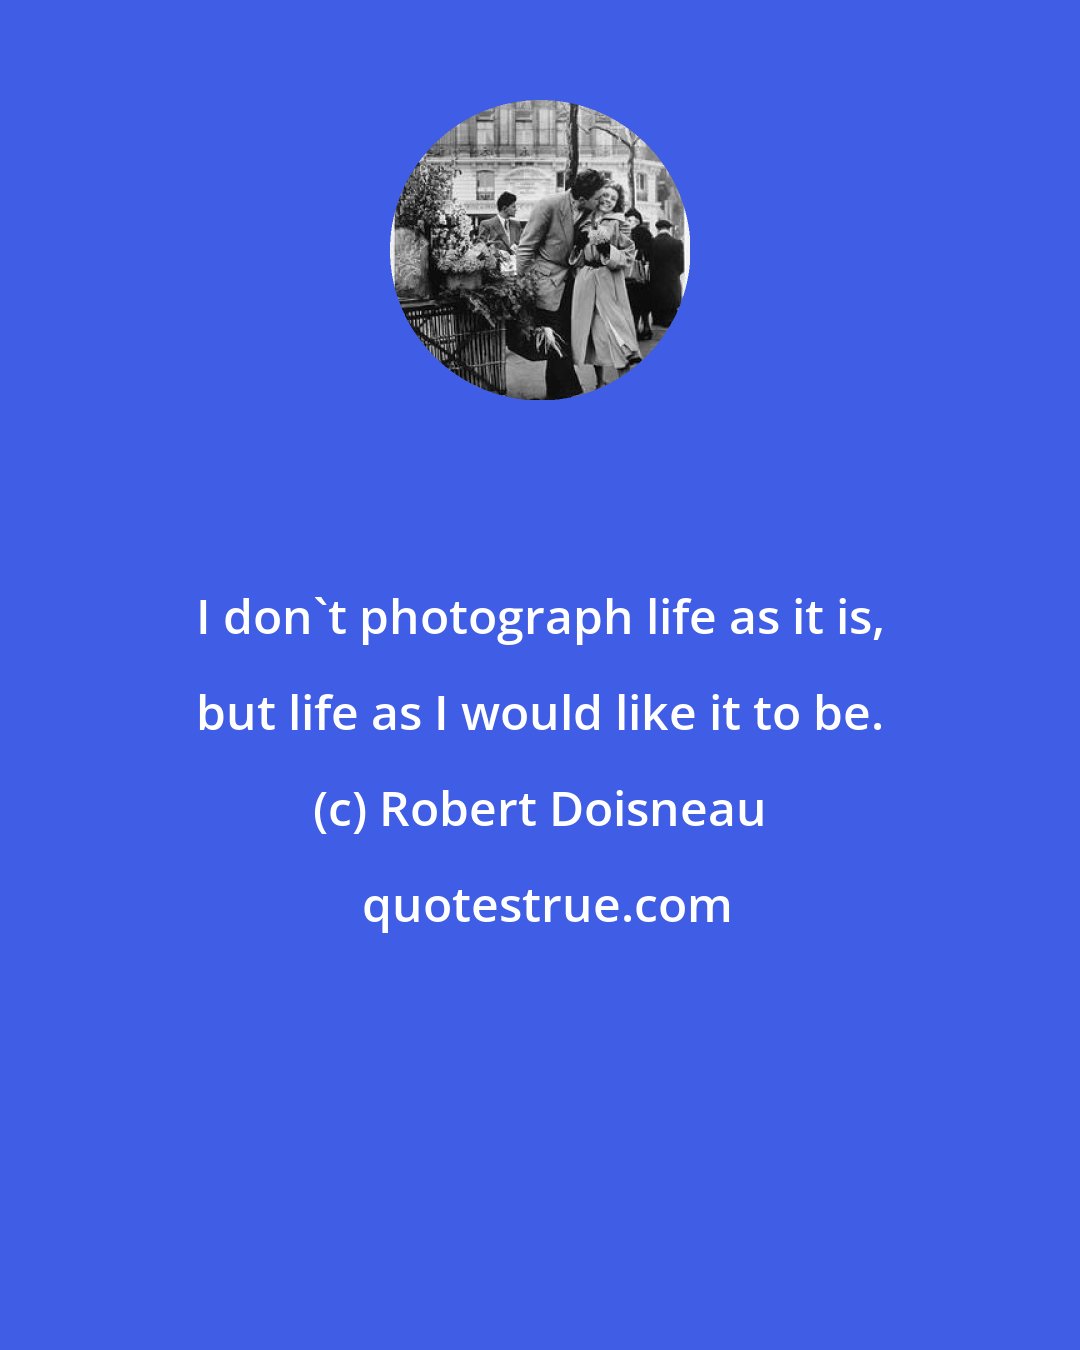 Robert Doisneau: I don't photograph life as it is, but life as I would like it to be.